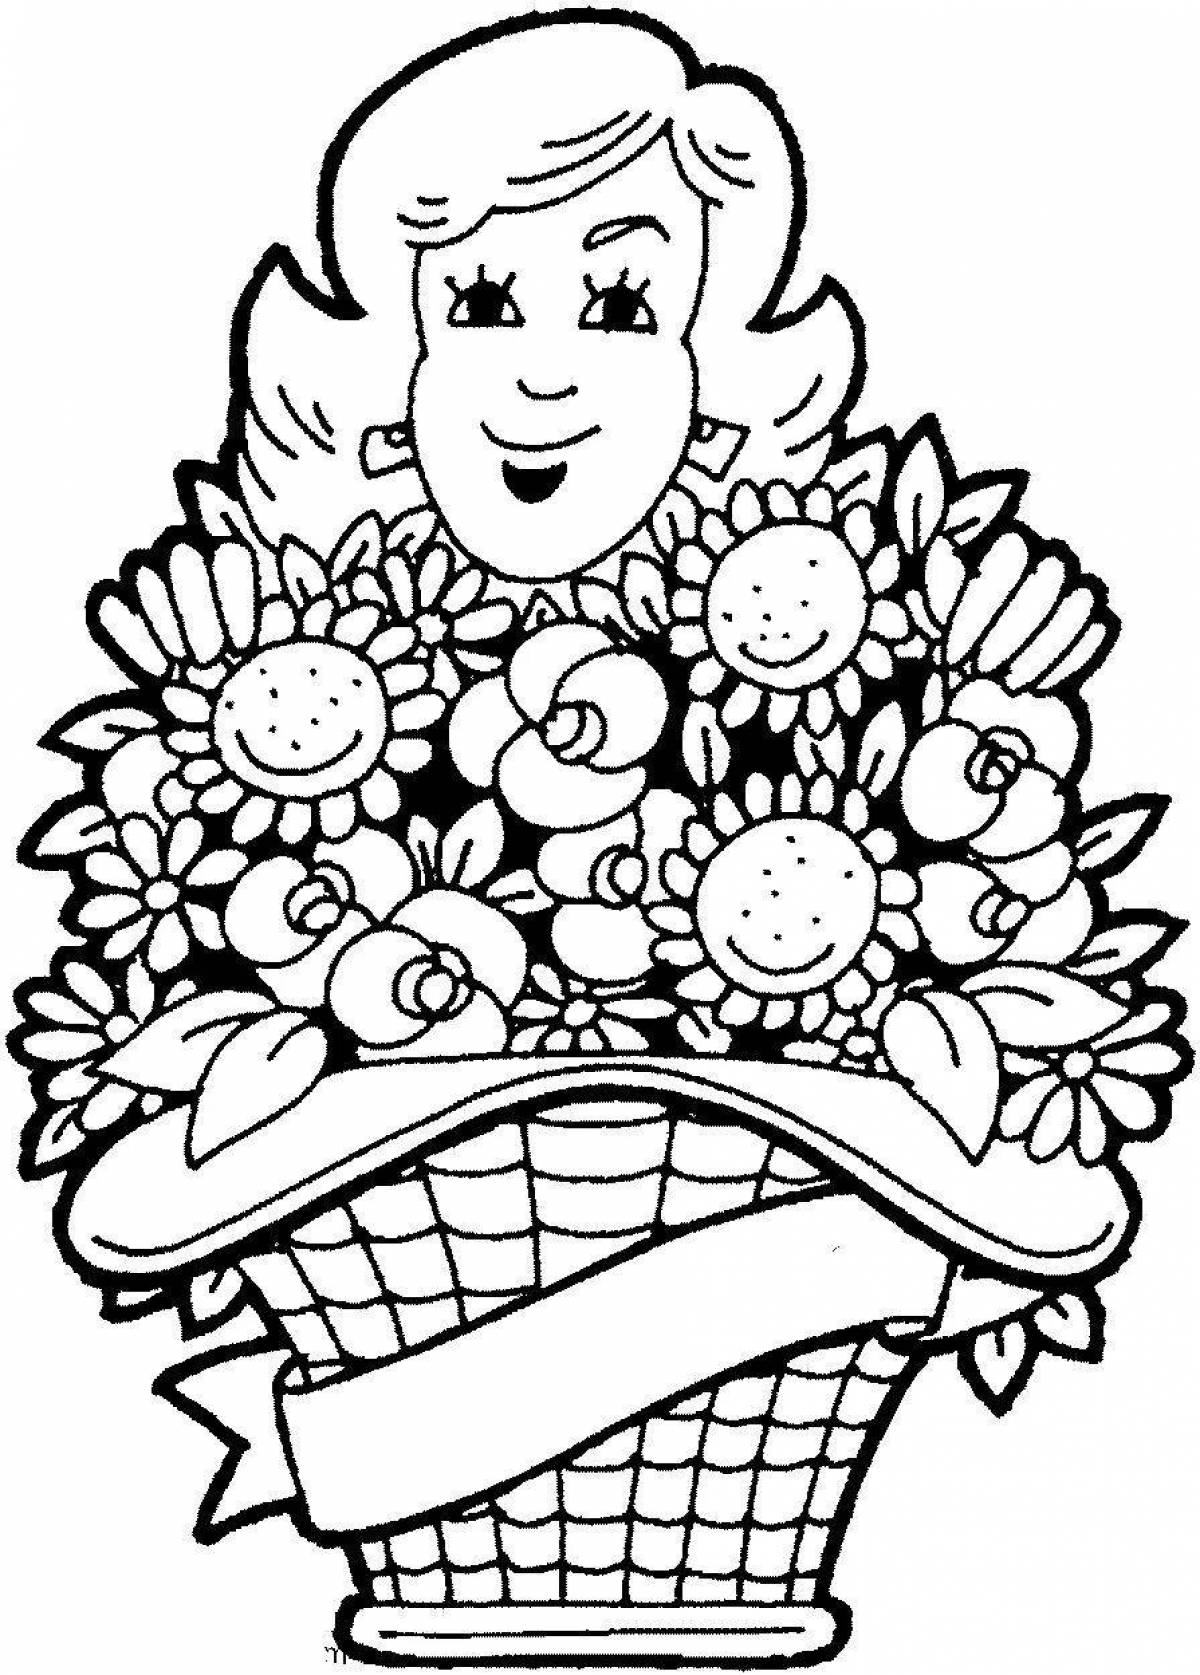 Coloring page magnanimous mommy